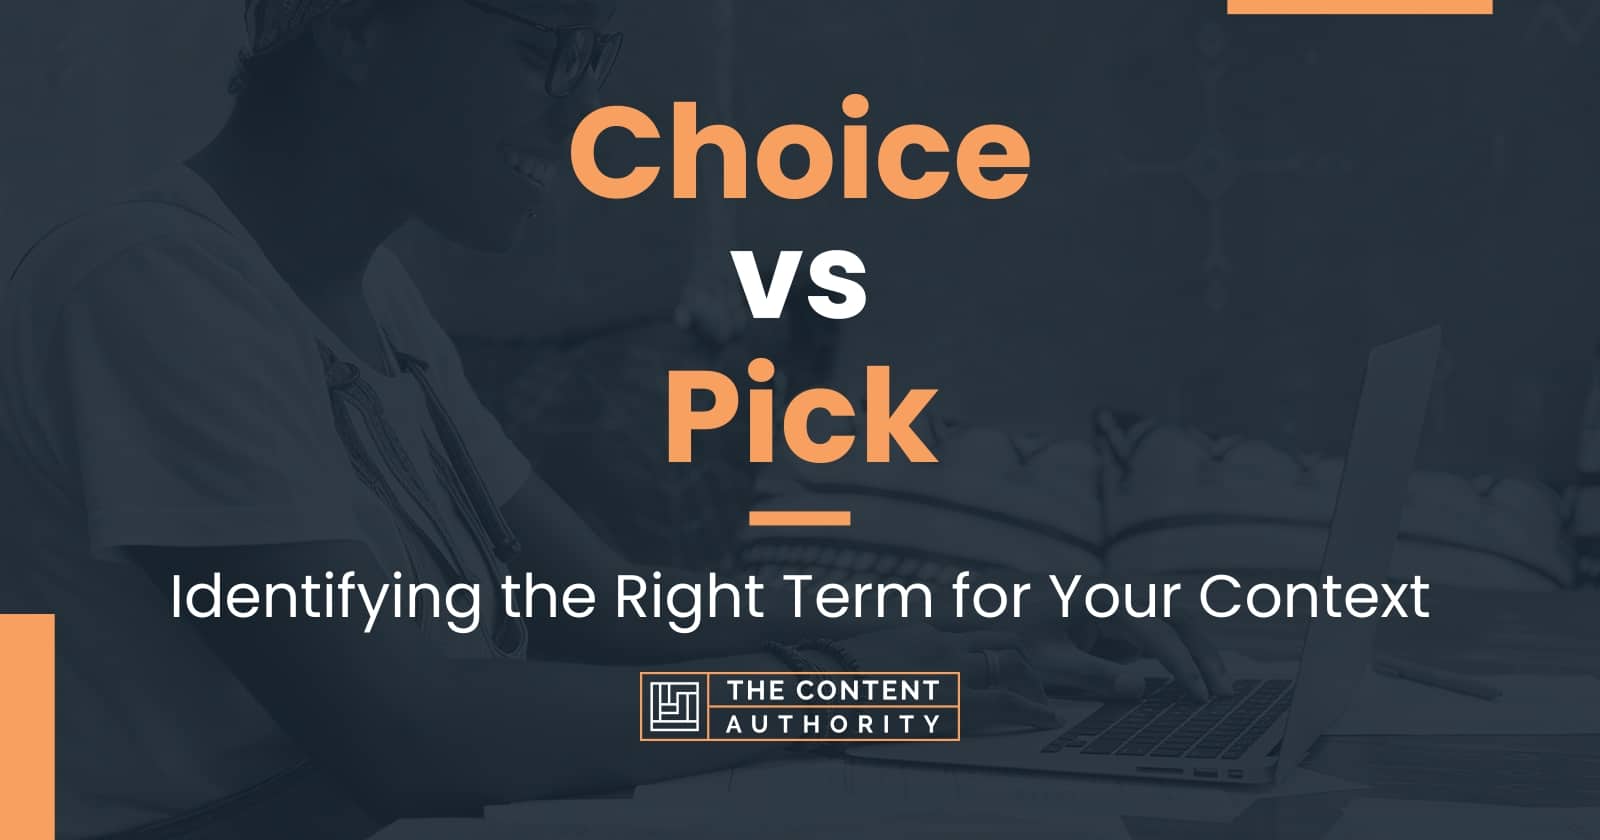 What is the difference between 'pick' and 'choose' and 'select